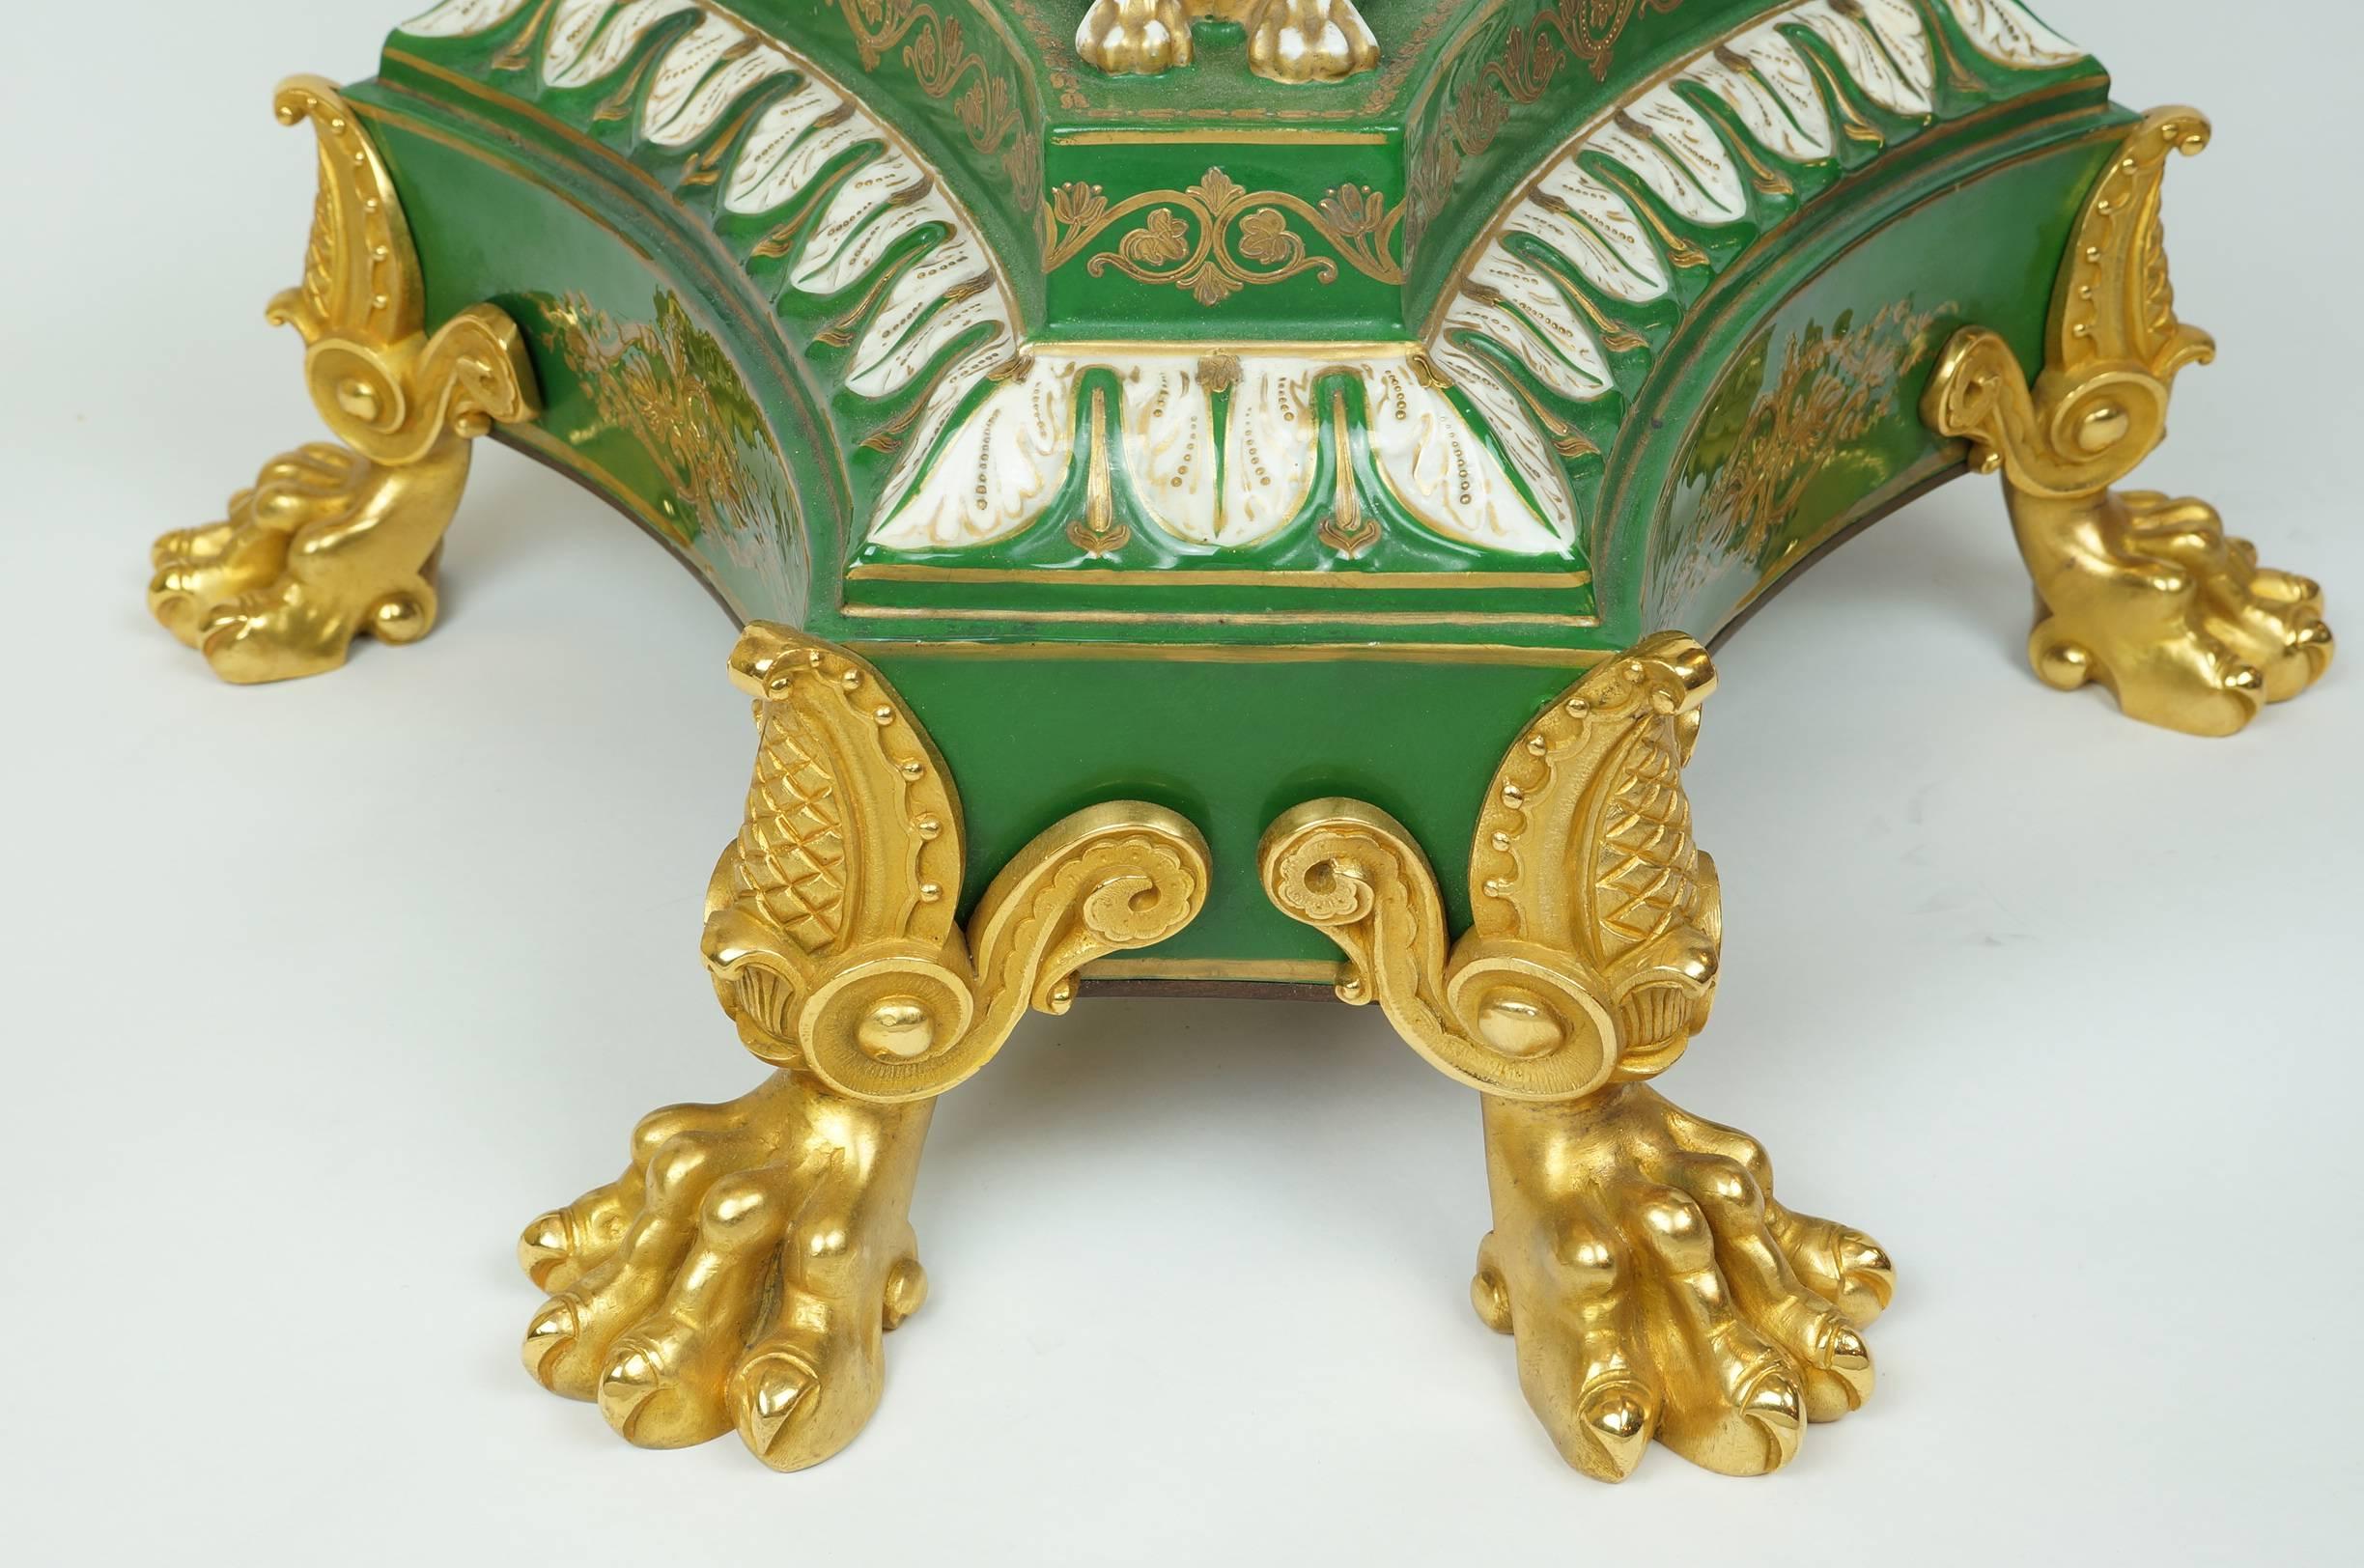 Napoleonic Green Sevres Porcelain Table with Winged Lion Figures For Sale 2